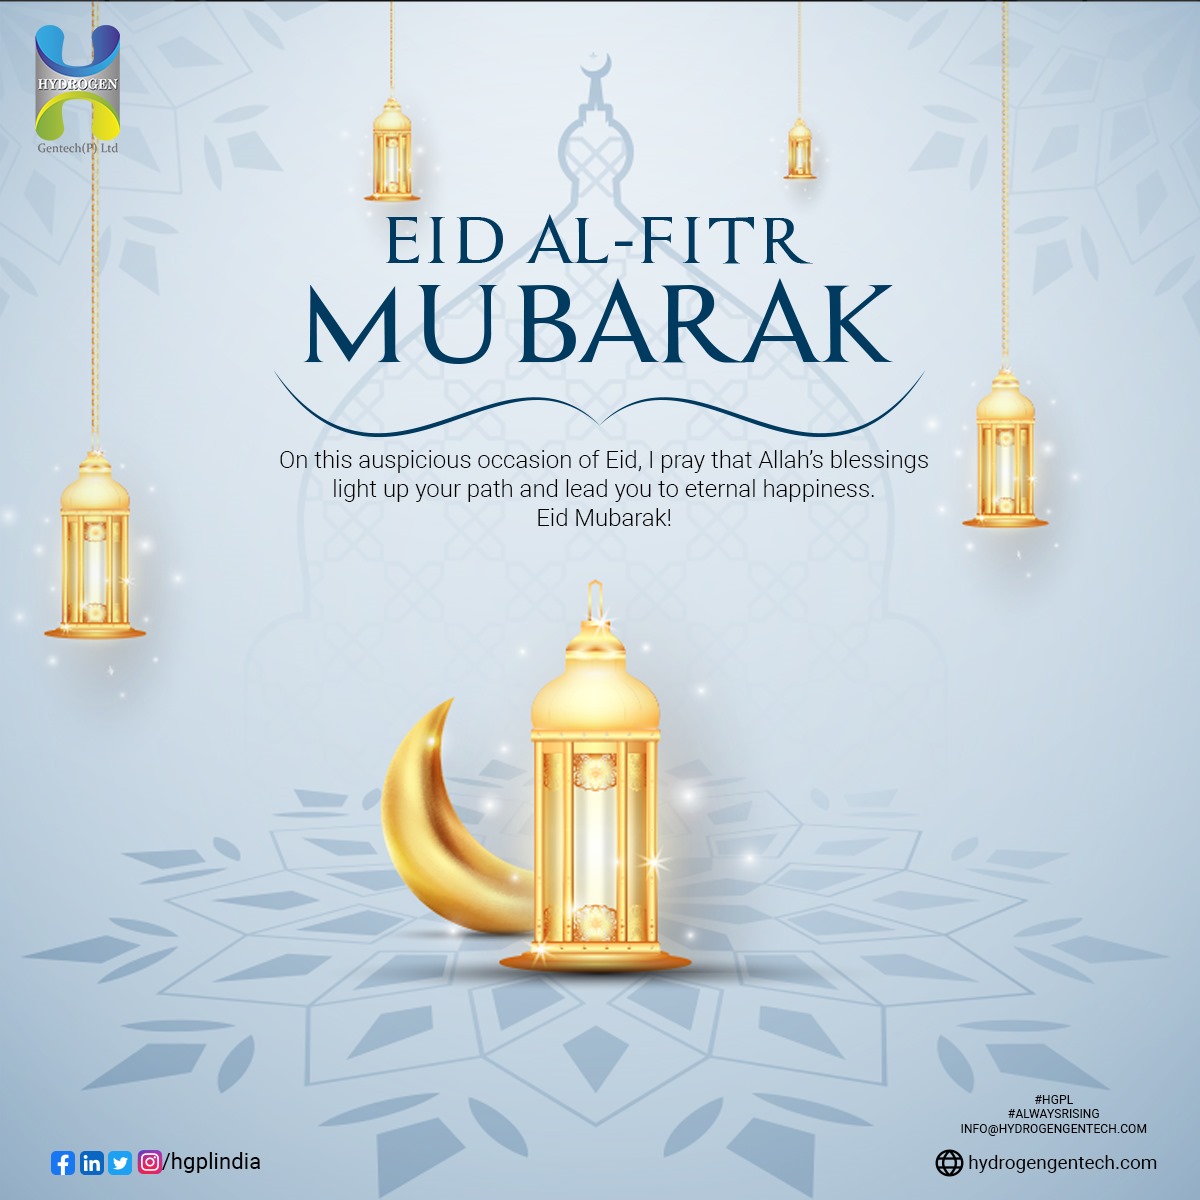 🌙 Eid Mubarak! 🌟 Wishing you and your loved ones a joyous Eid filled with blessings, peace, and happiness. May this special day bring you closer to family, friends, and the spirit of unity. ✨ Let's celebrate the beauty of diversity and the power of togetherness.